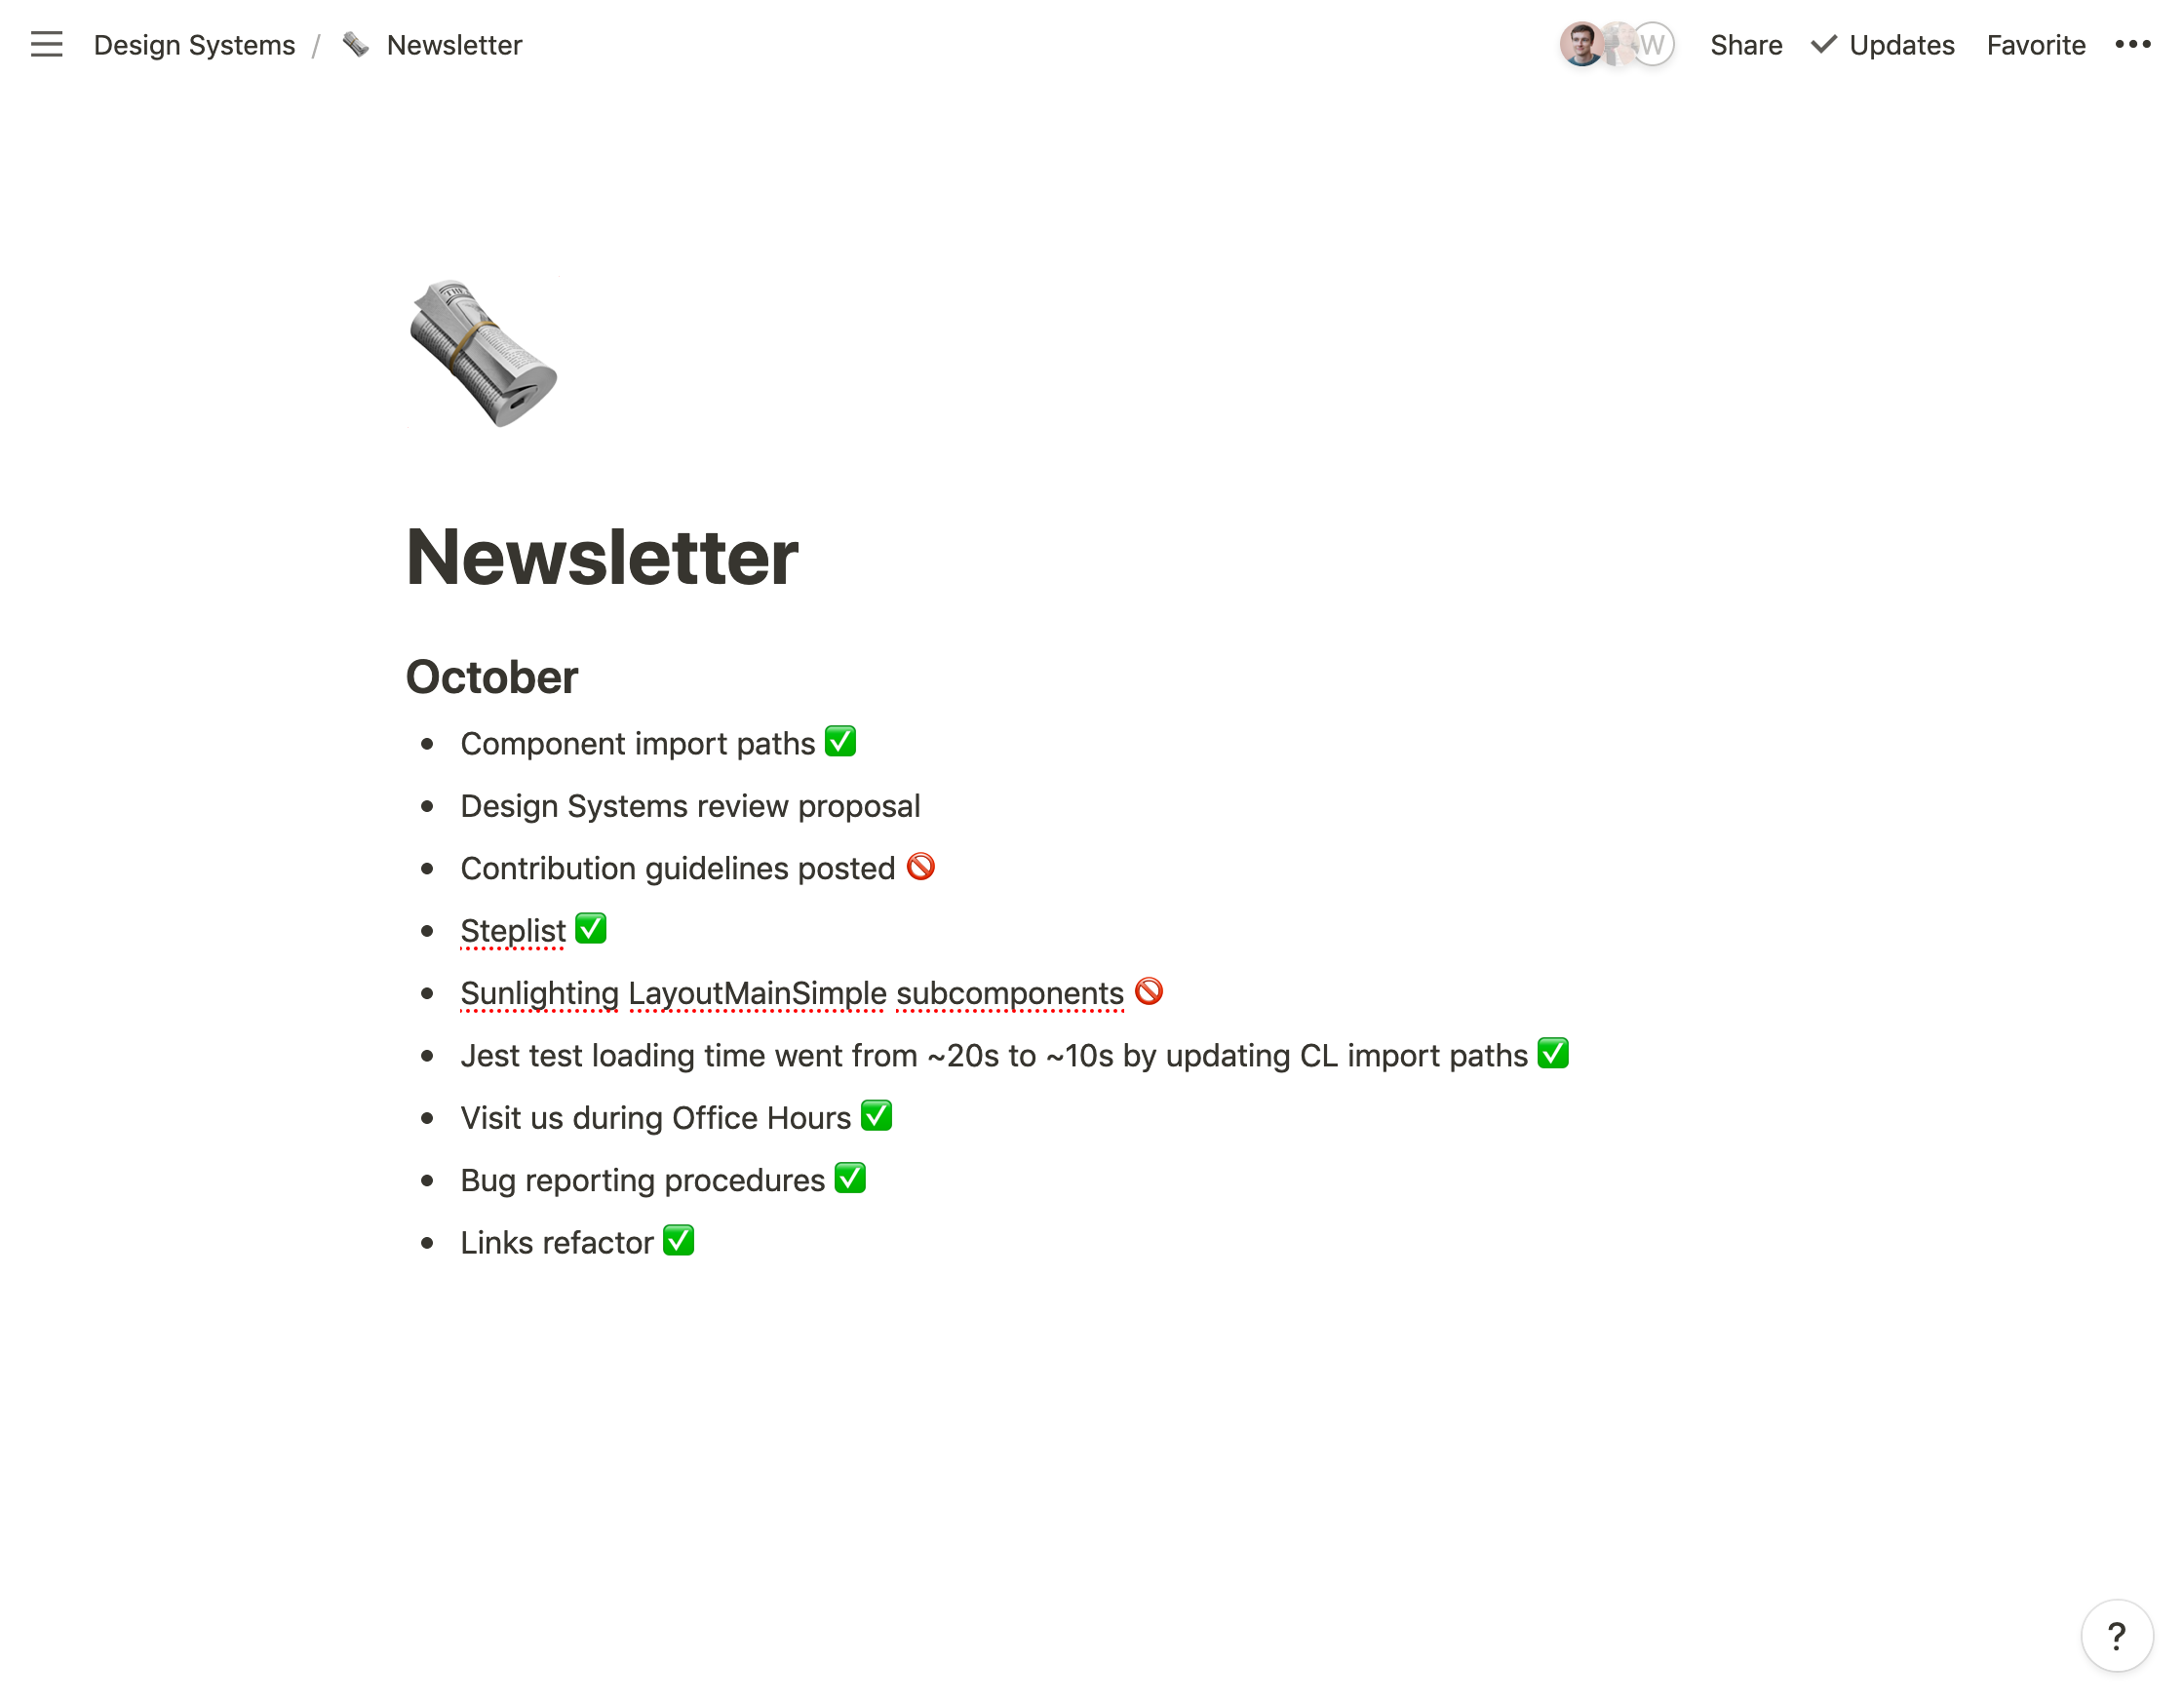 The Notion app with our notes for the newsletter